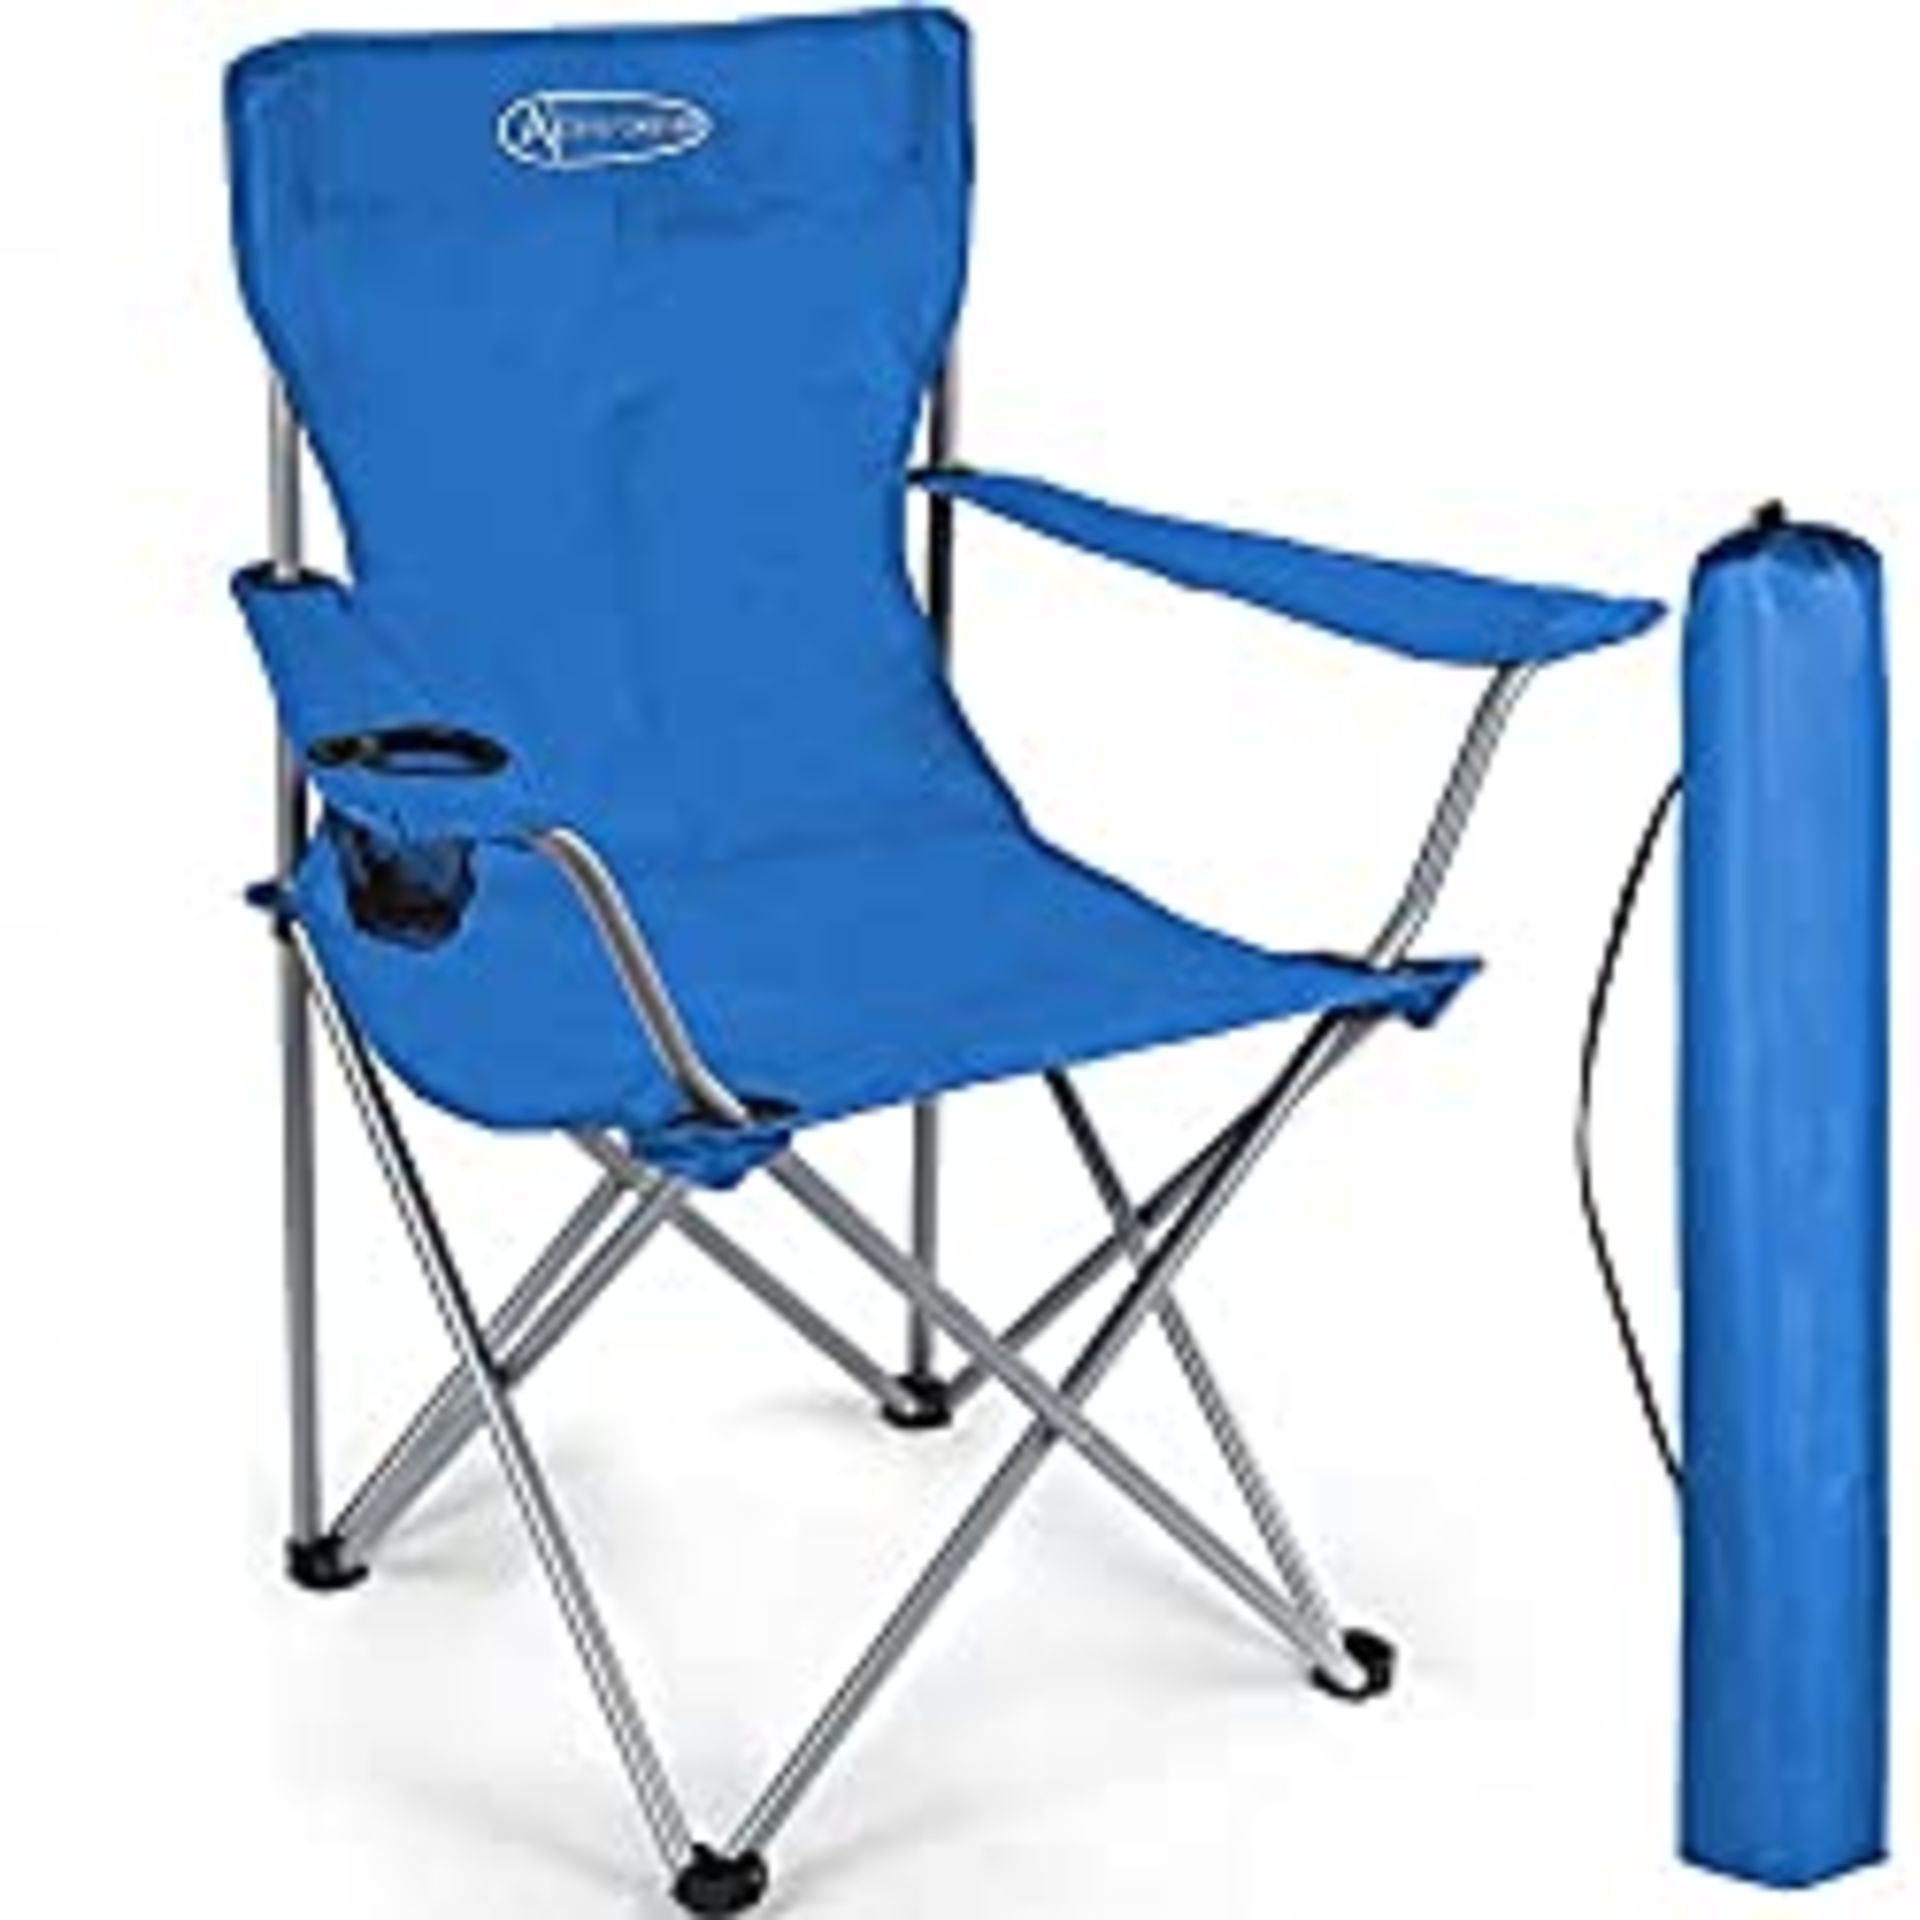 RRP £21.98 ACTIVE FOREVER Outdoor Folding Camping Chair with Cup Holder Storage Bag